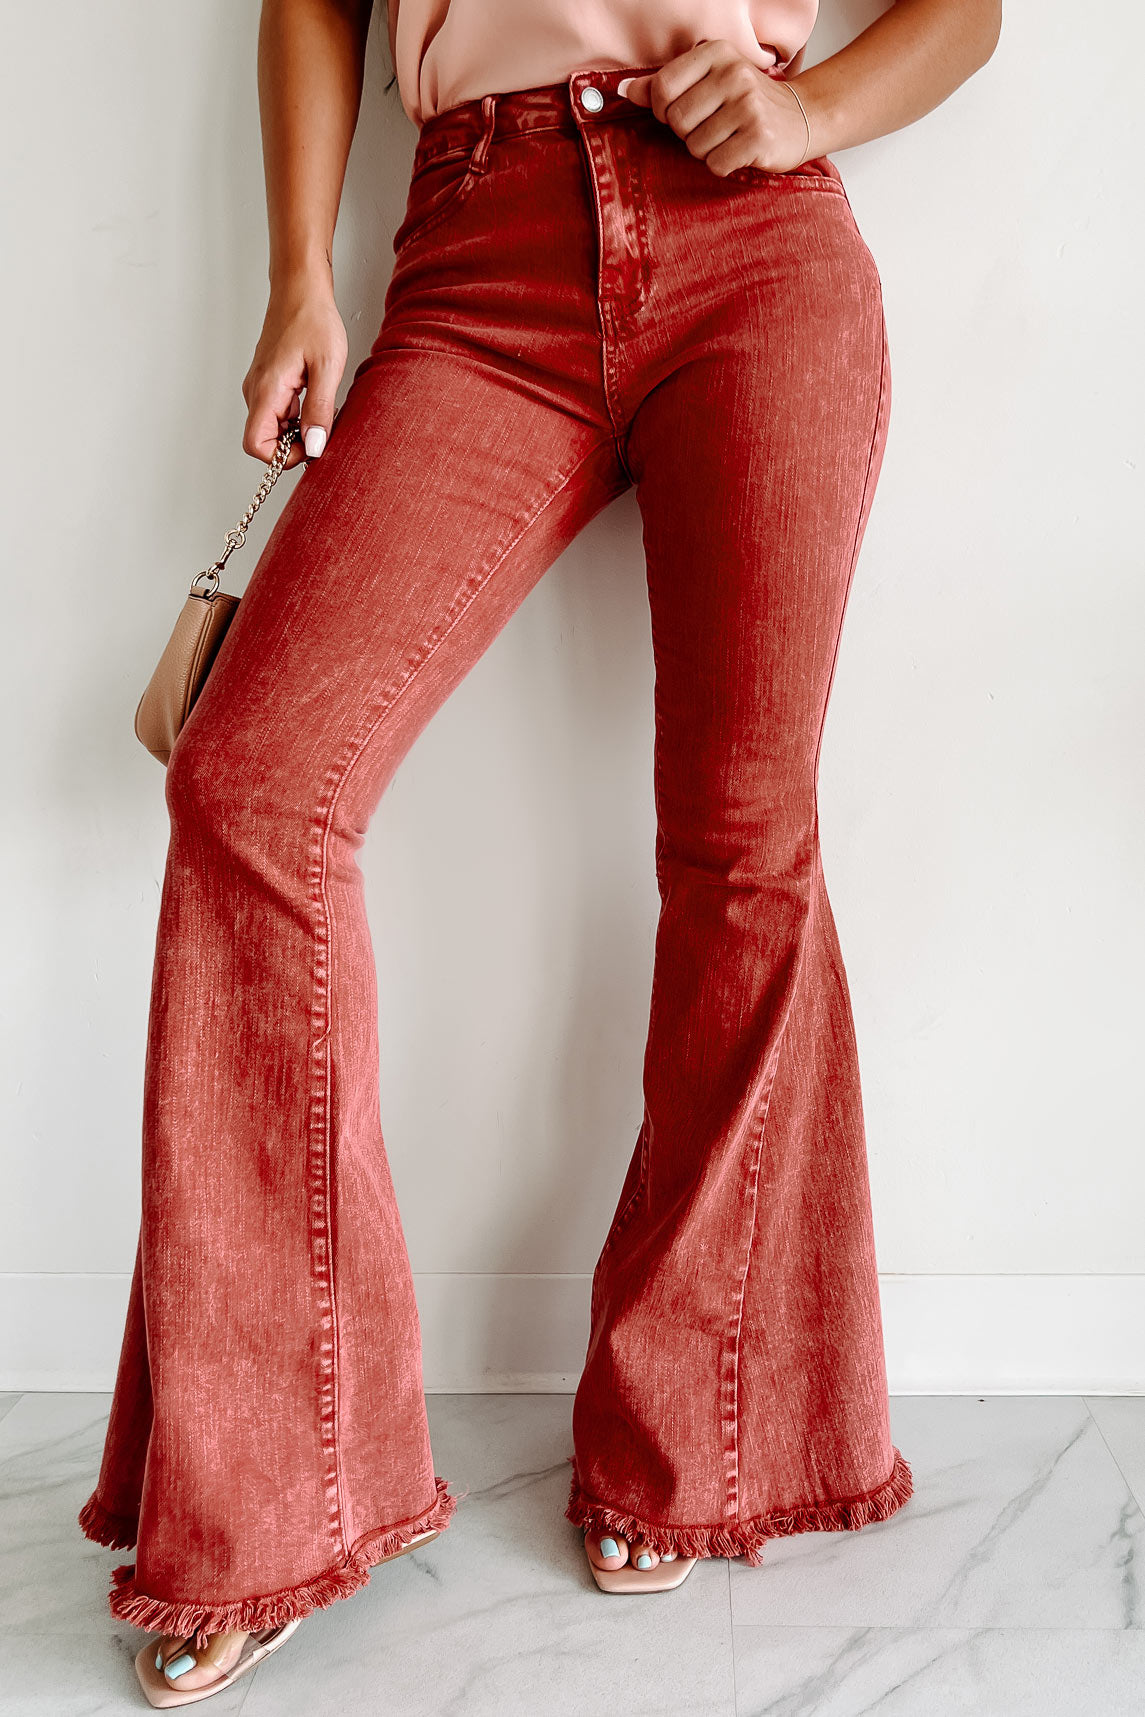 Saints & Hearts Women's My Own Time Mid-Rise Bell Bottom Flare Jeans in Brick Red - Size S